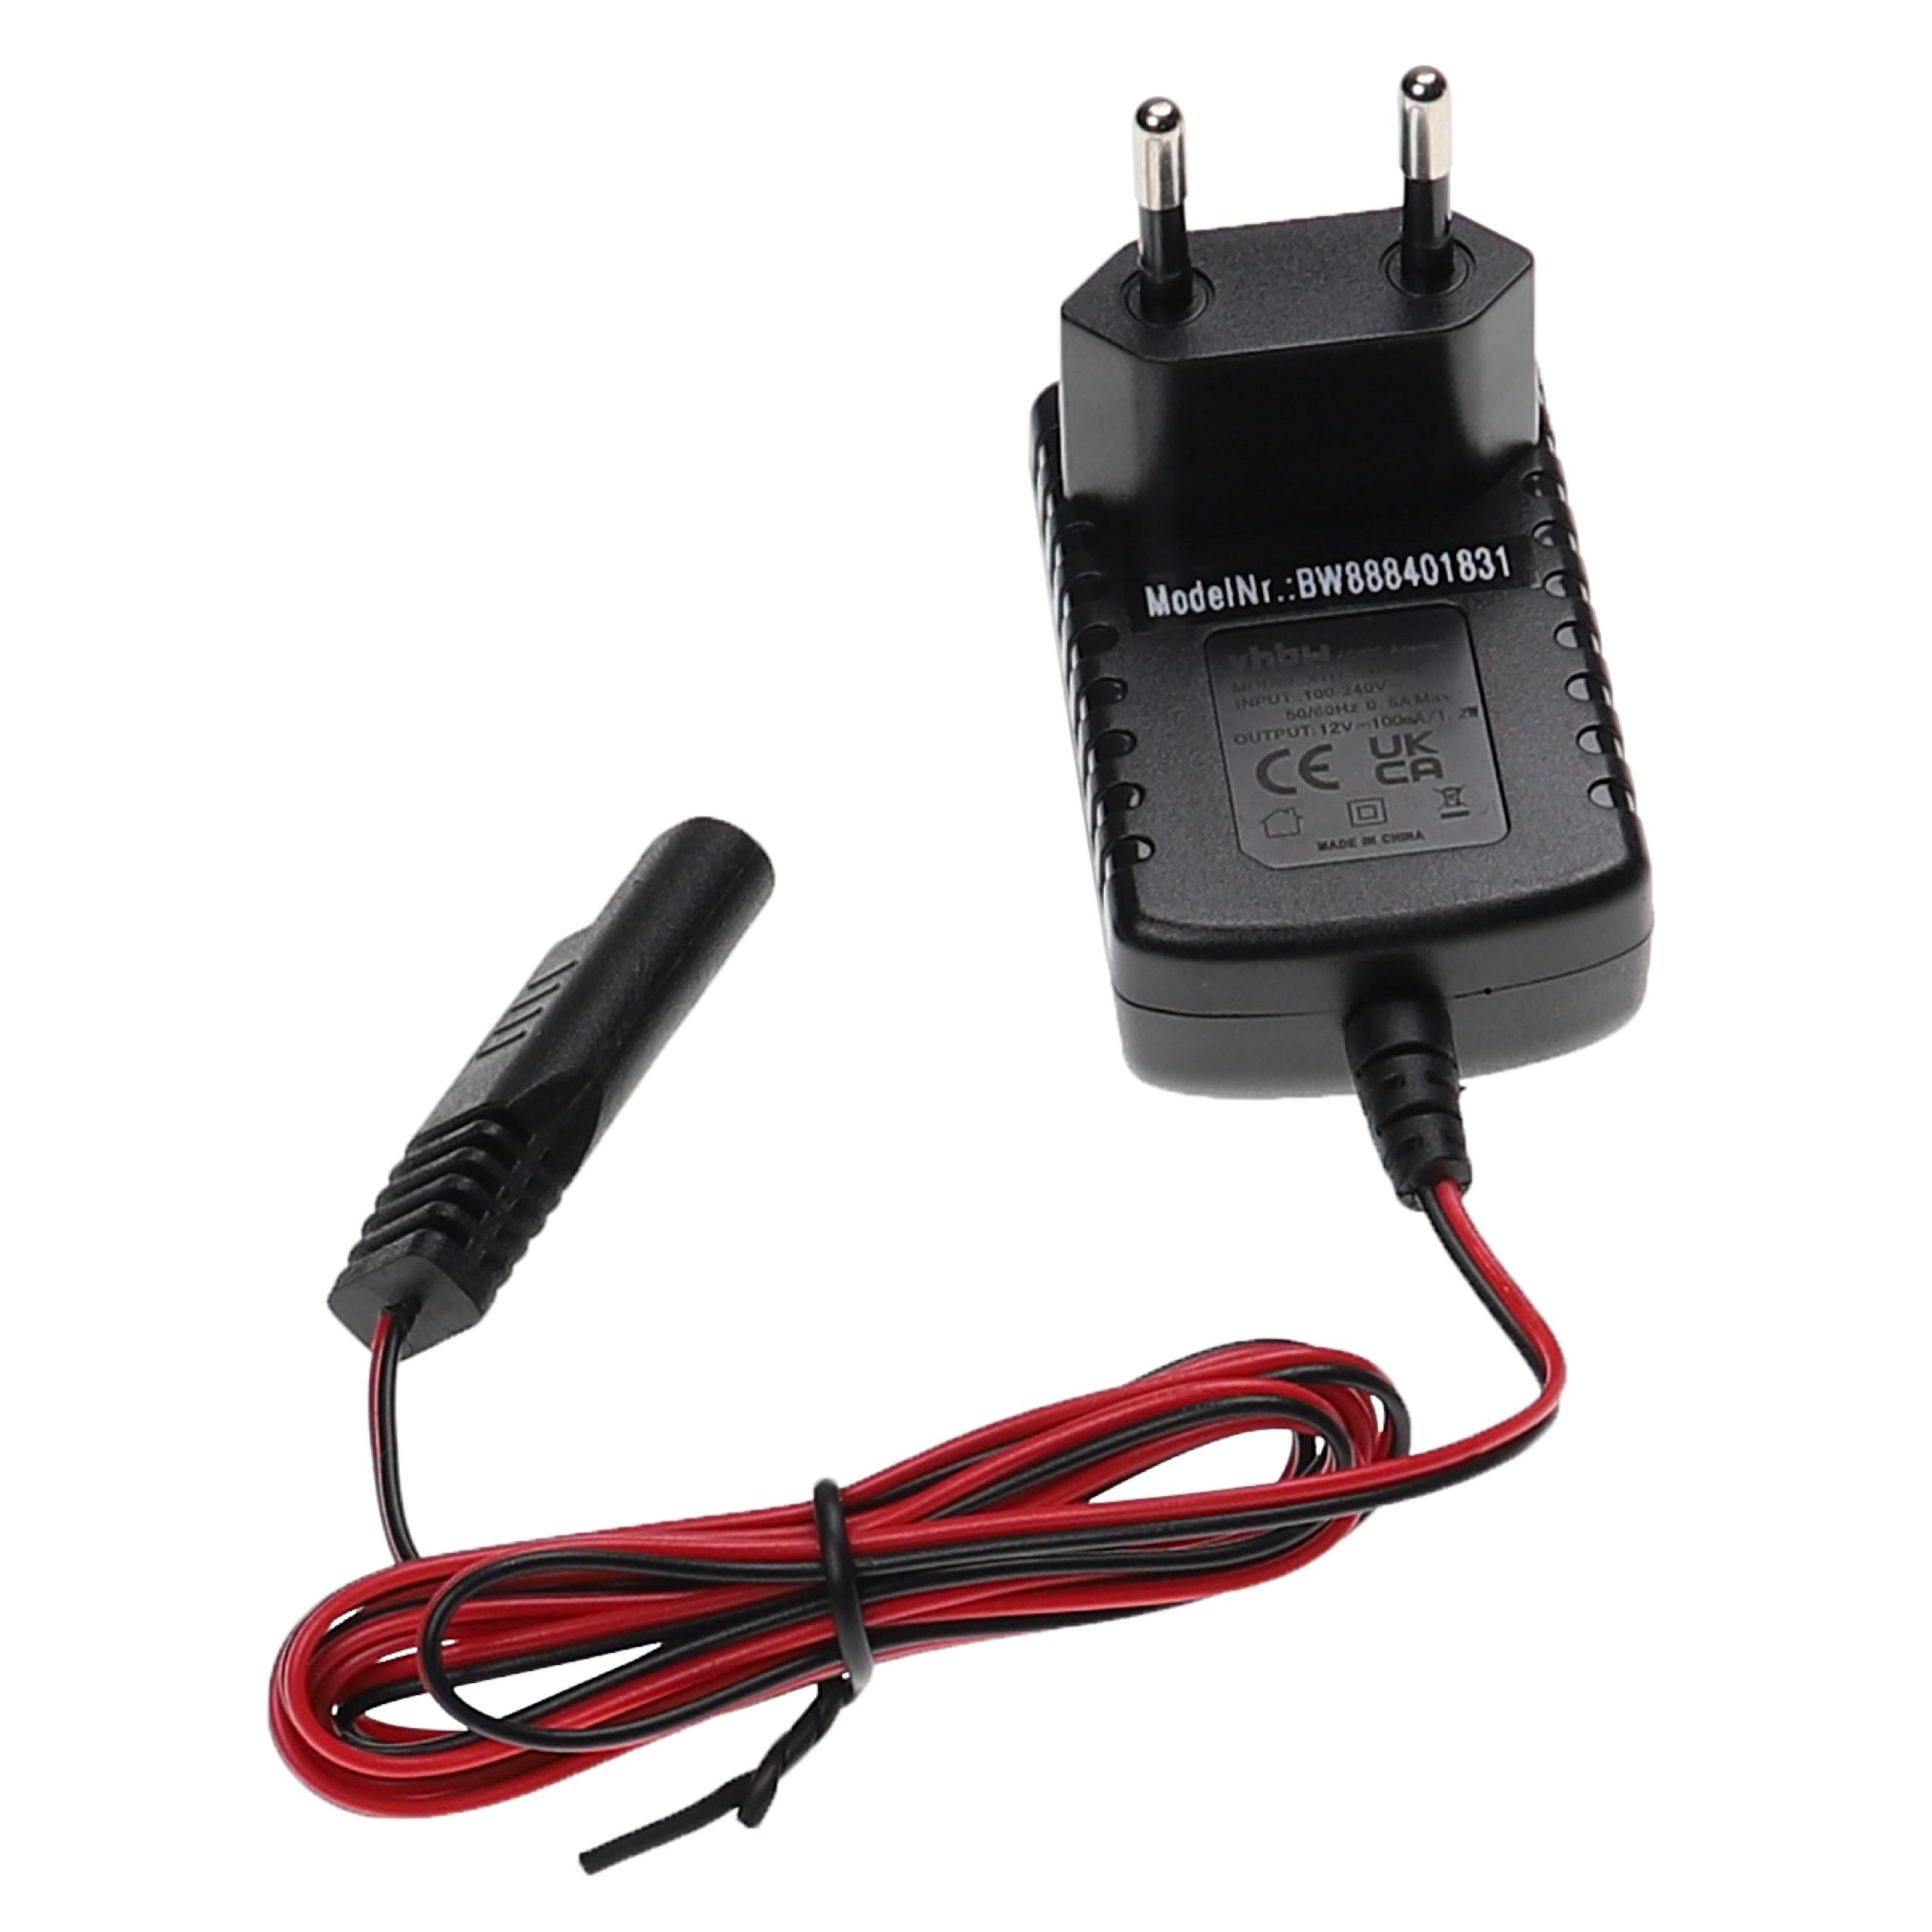 Starter Battery Charger suitable for Honda Lawn Mower etc. - 12 V / 0.1 A, 2 m